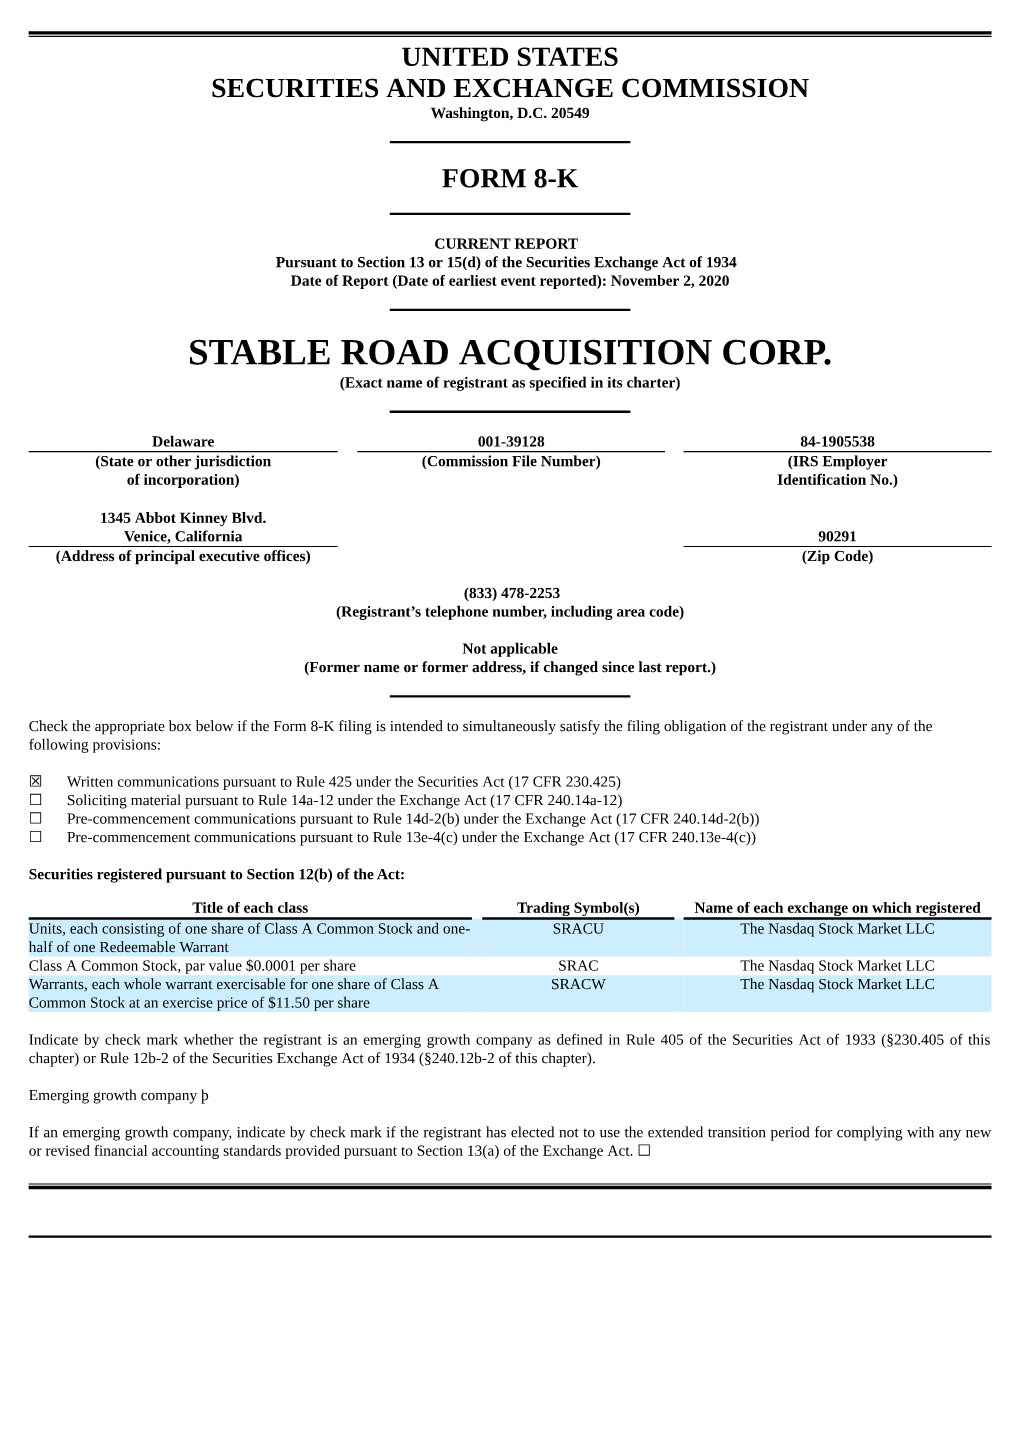 STABLE ROAD ACQUISITION CORP. (Exact Name of Registrant As Specified in Its Charter)